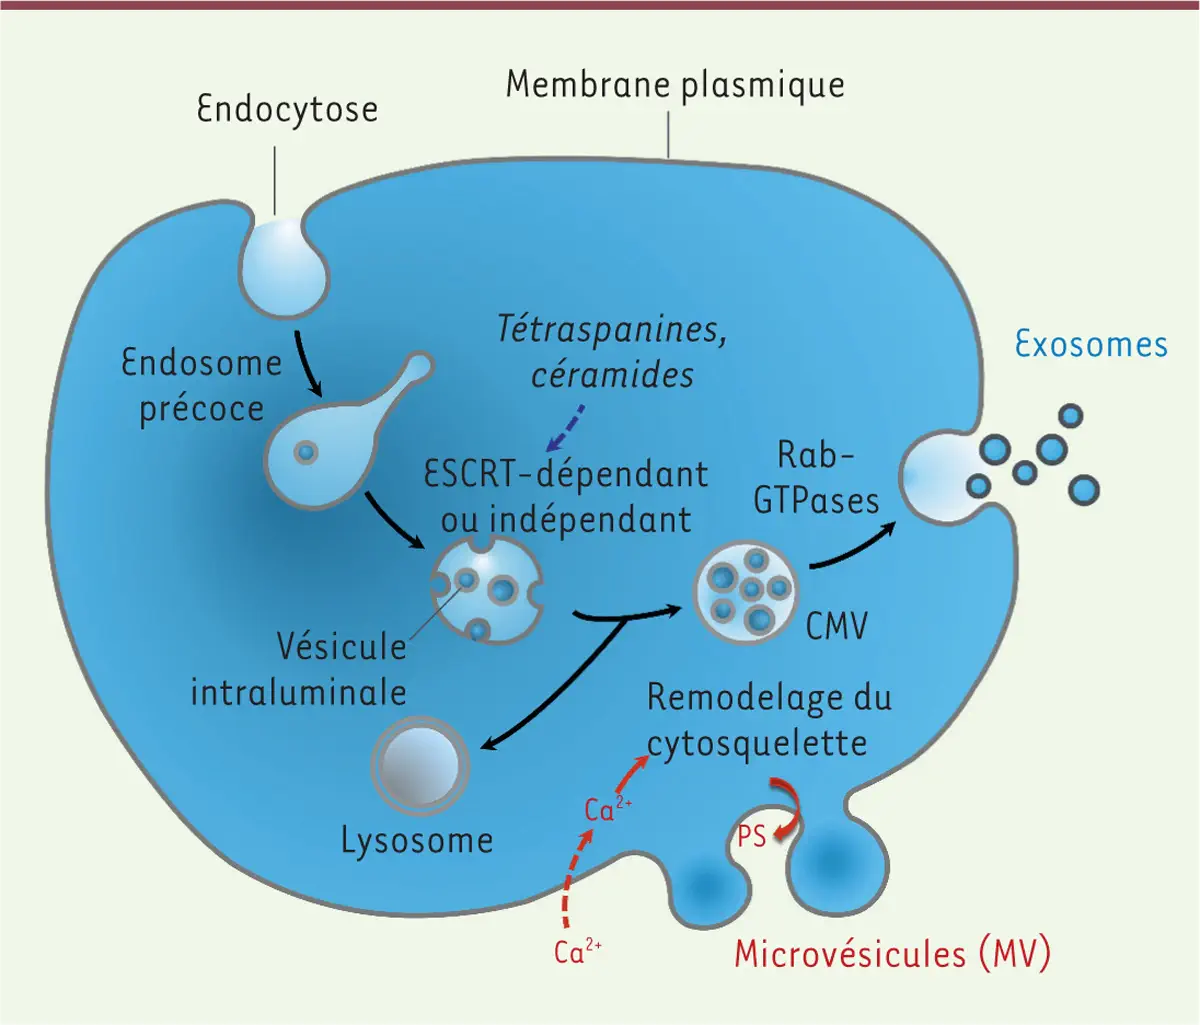 Cells release exosomes via two mechanisms